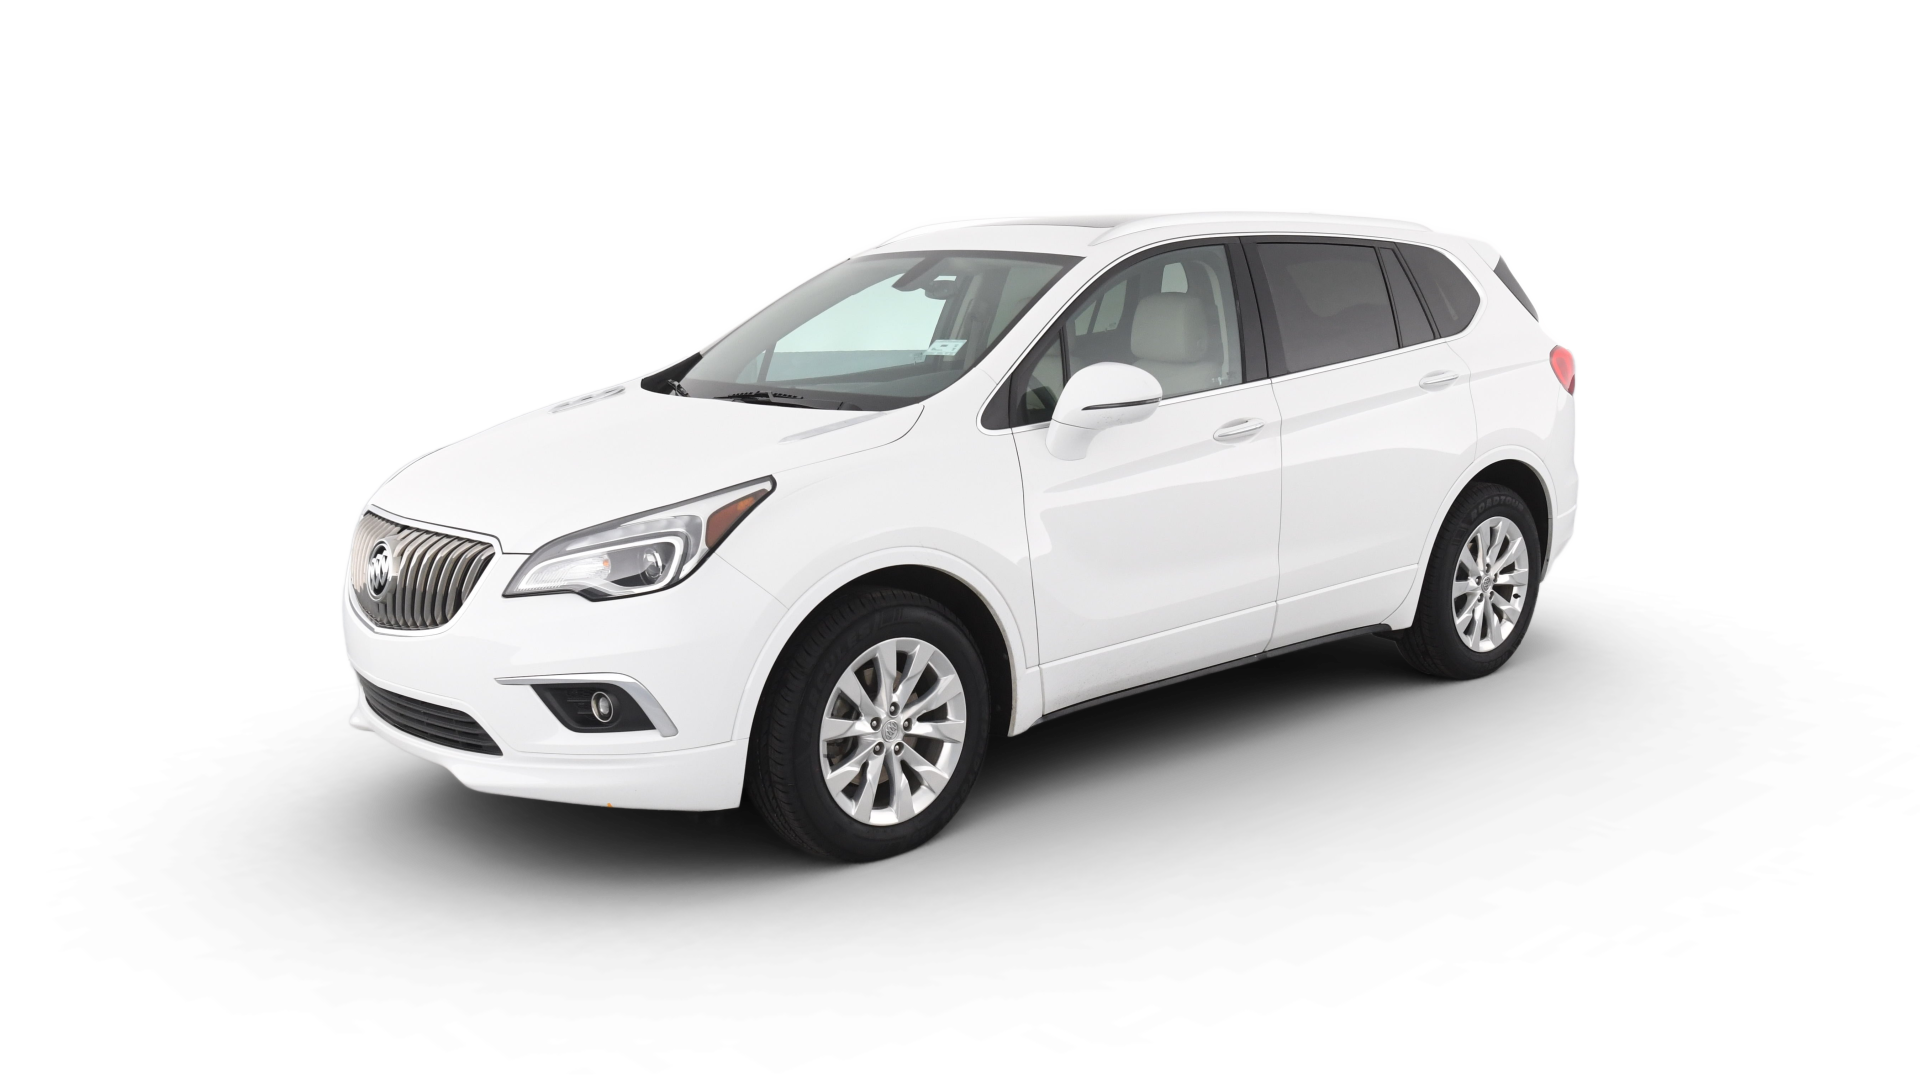 Buick Envision model image.